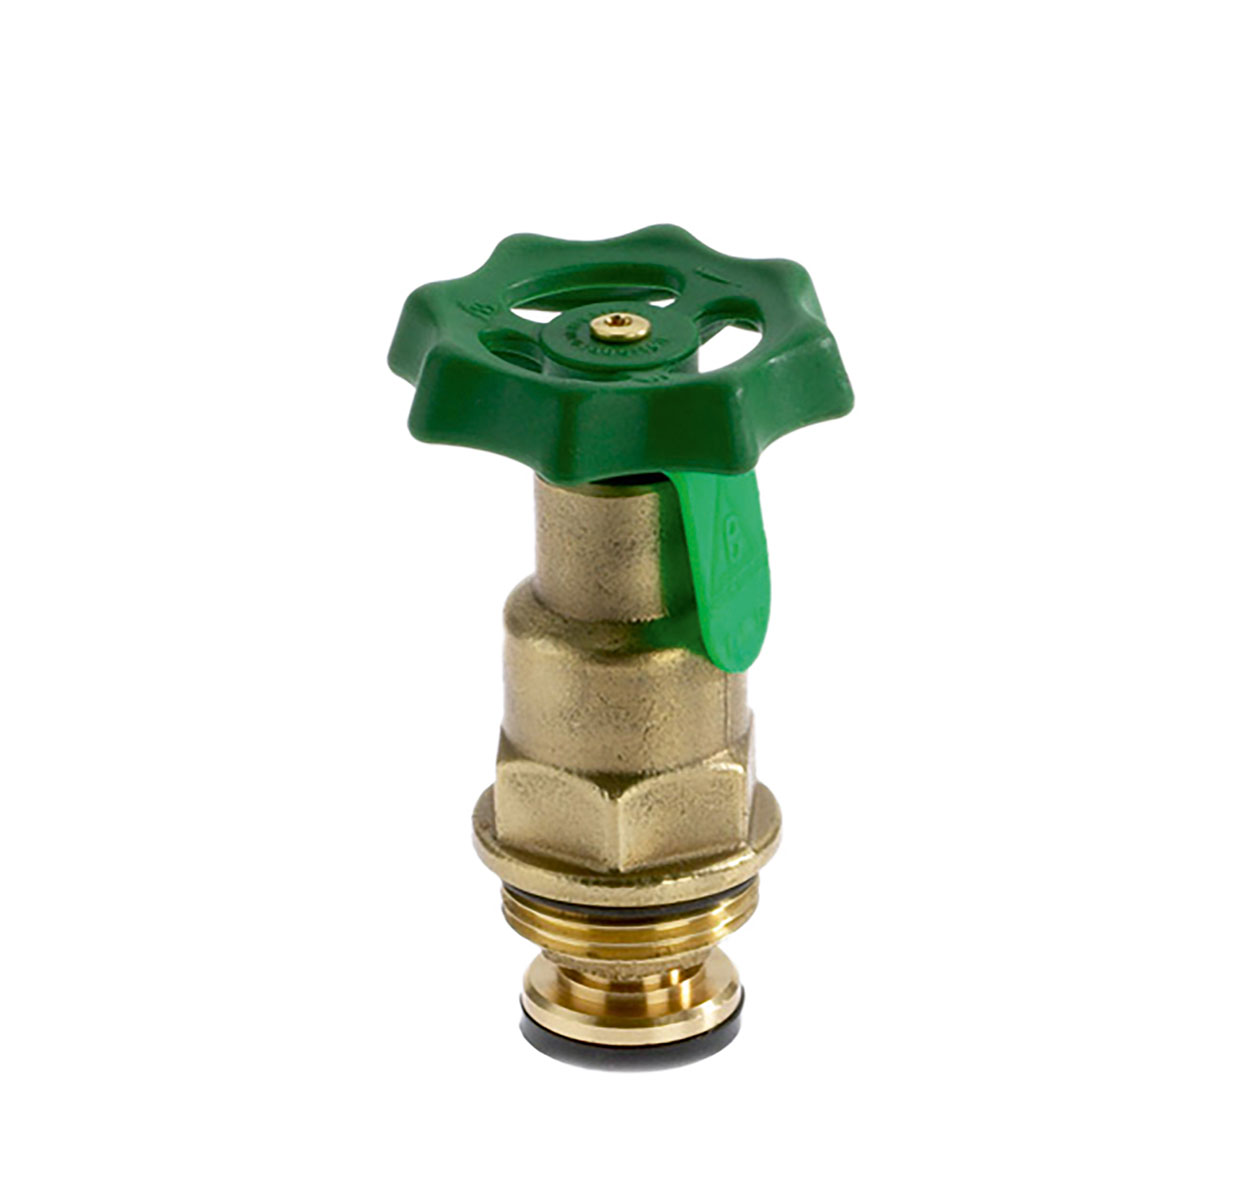 1215150 - Brass Upper-part with grease chamber for Combined Free-flow and Backflow-preventer valves, not-rising spindle